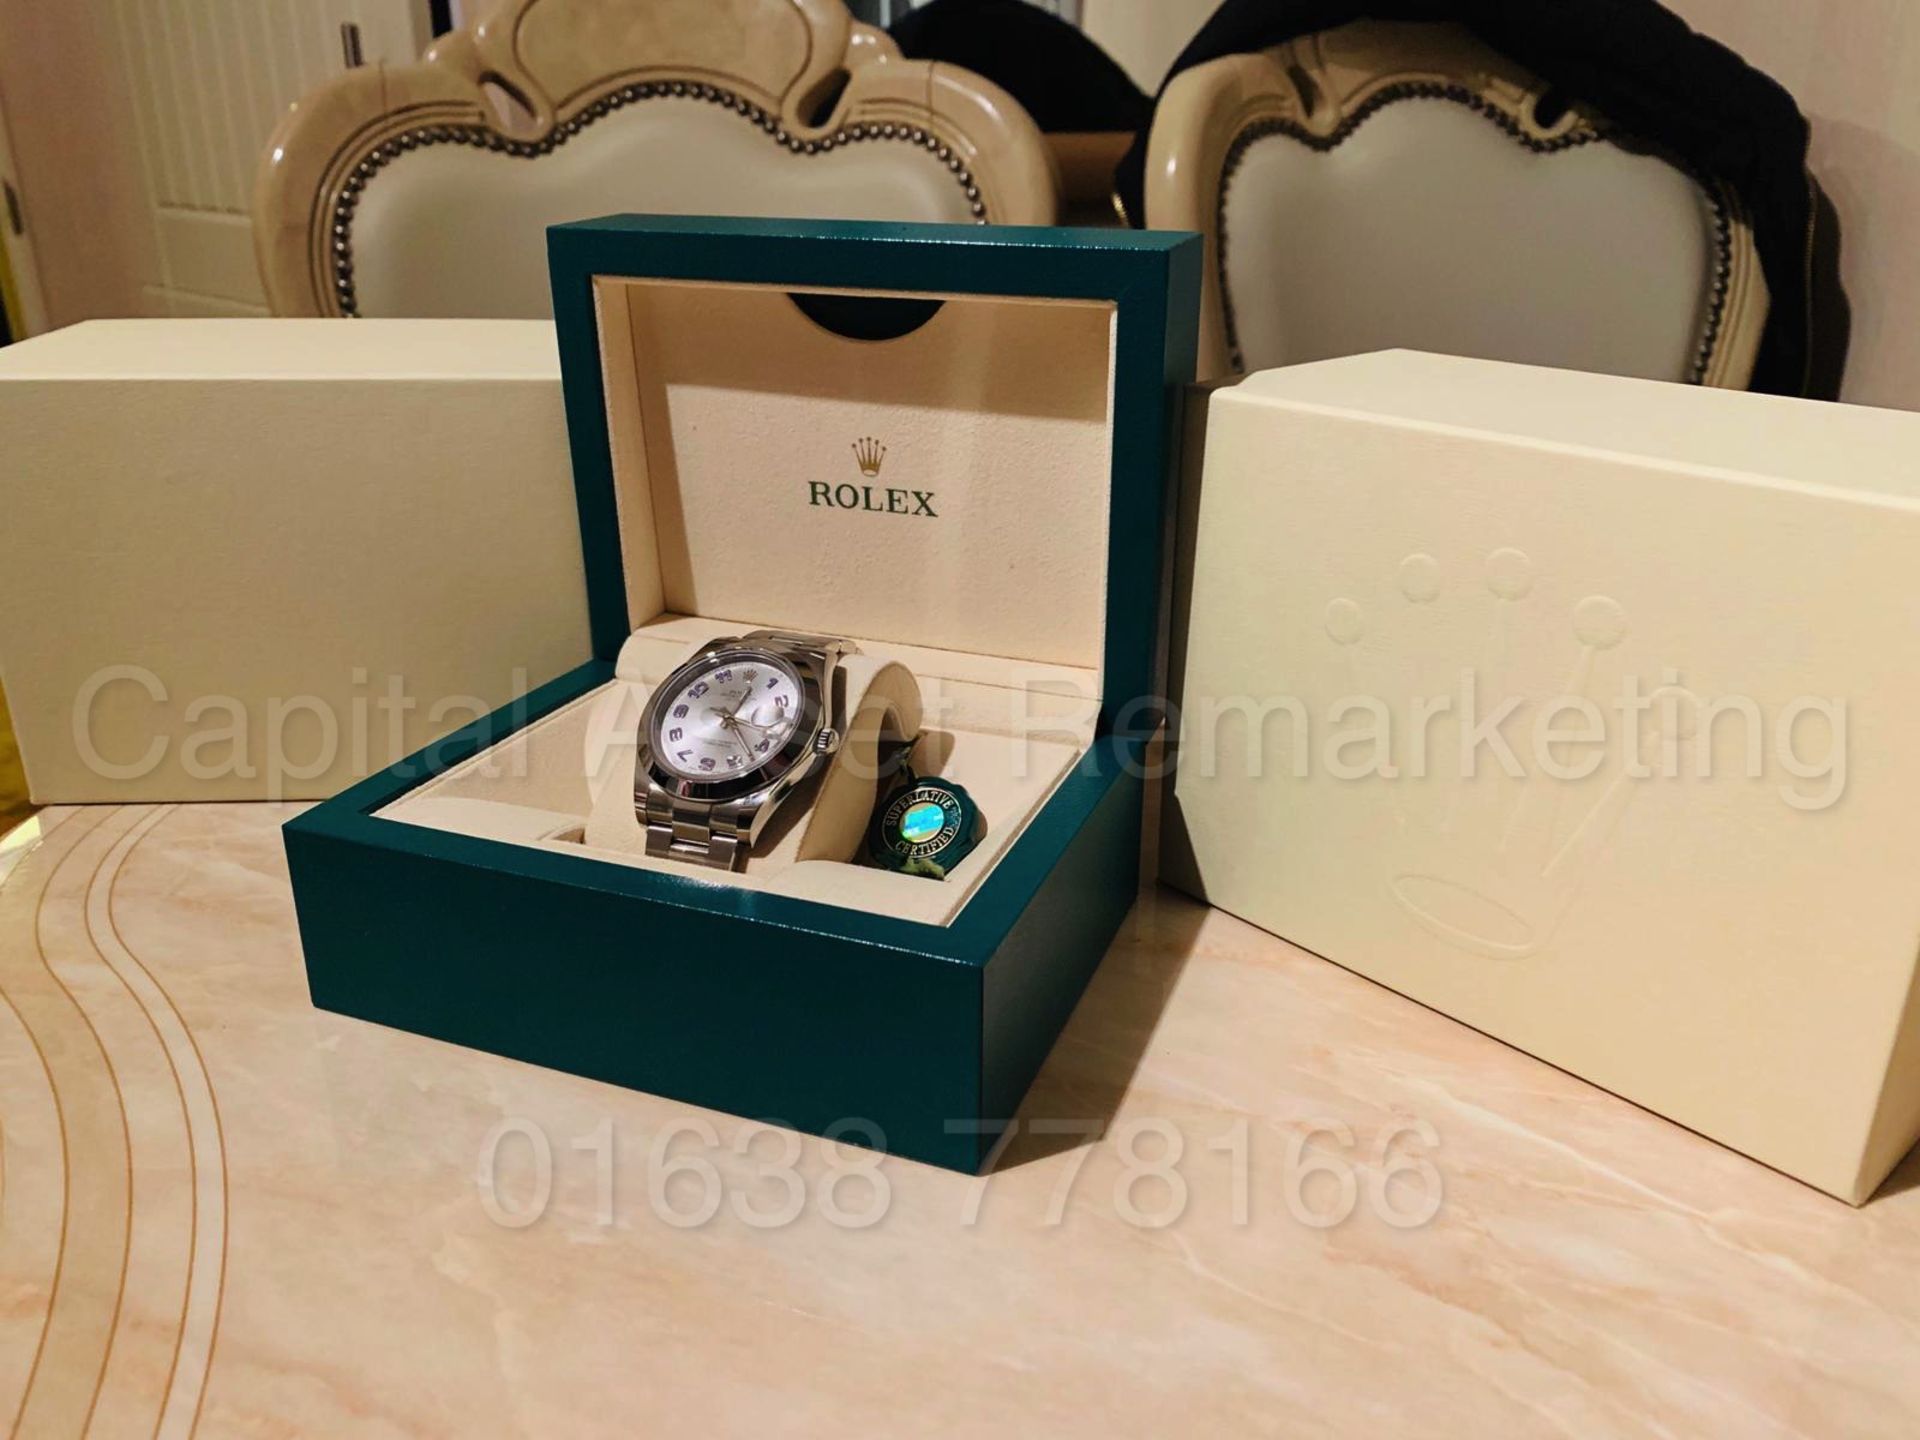 ROLEX OYSTER PERPETUAL *41MM DATEJUST* (BRAND NEW / UN-WORN) *GENUINE* (ALL PAPERWORK & BOX PRESENT) - Image 8 of 10